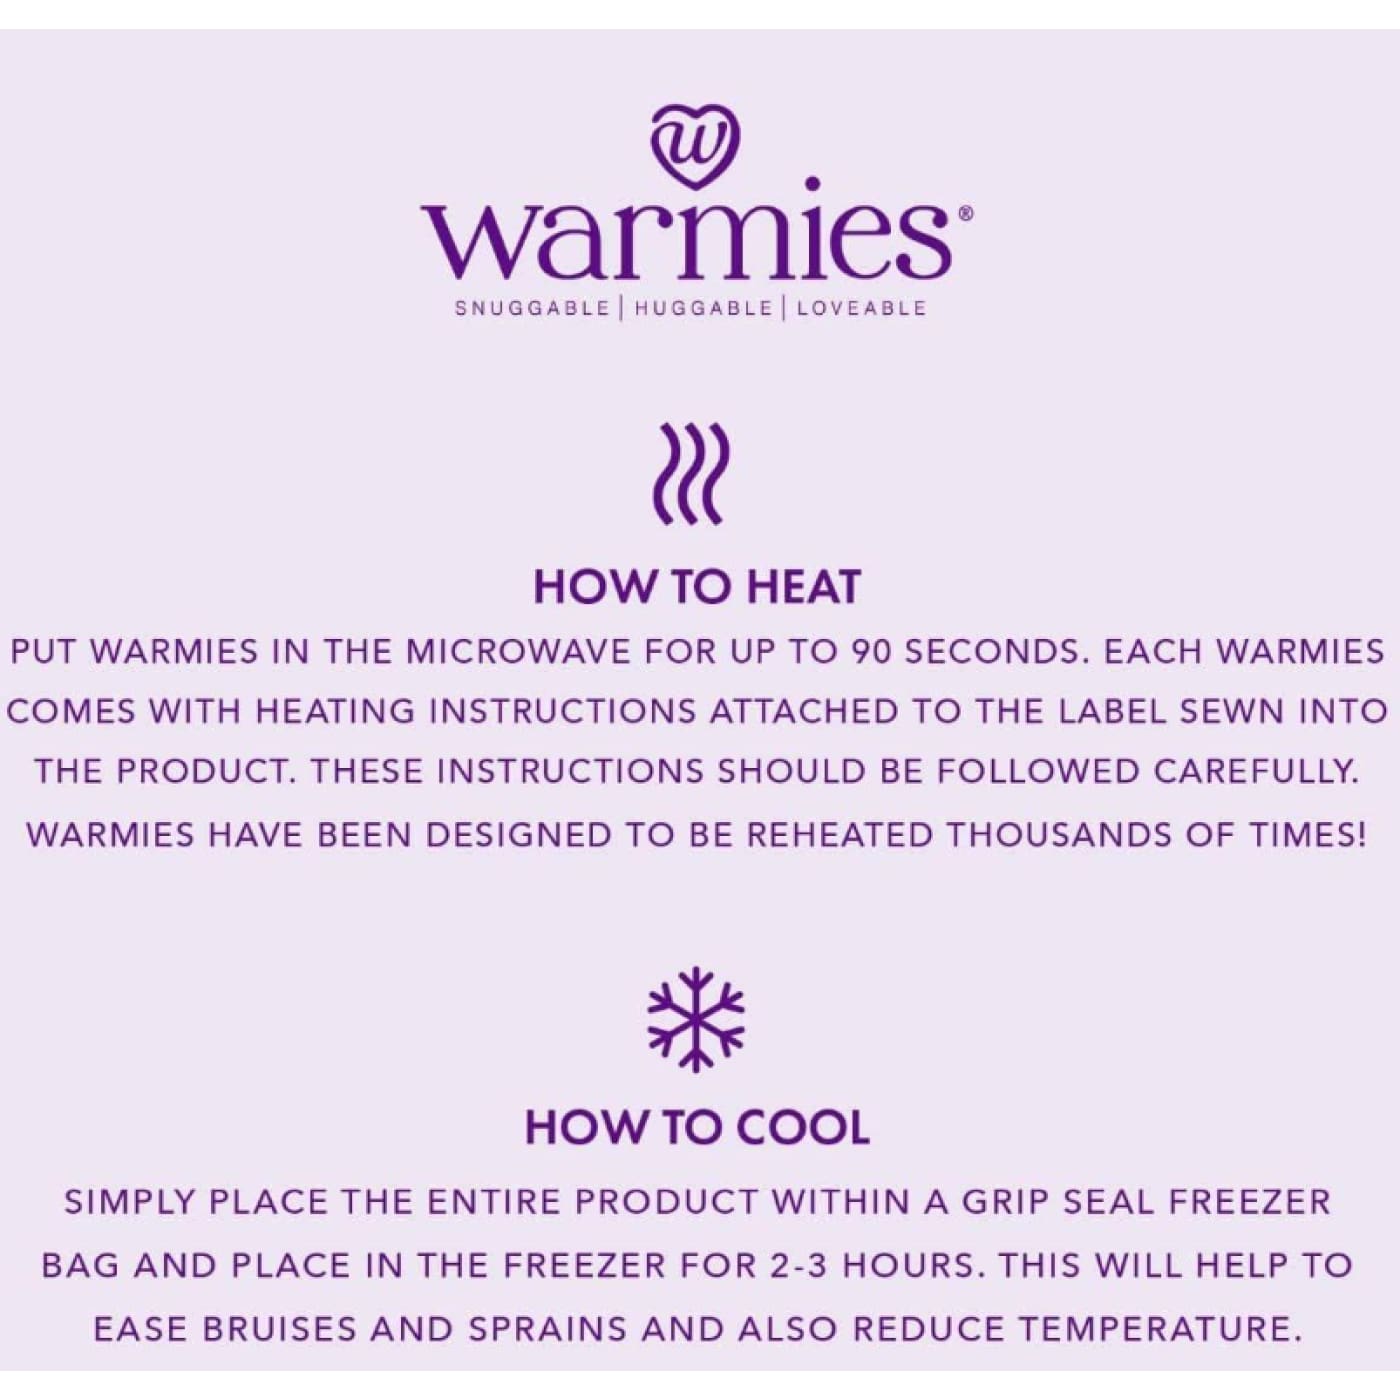 Warmies My First Heatable Soft Toy Scented with French Lavender - Pig - Pig - HEALTH & HOME SAFETY - THERMOMETERS/MEDICINAL